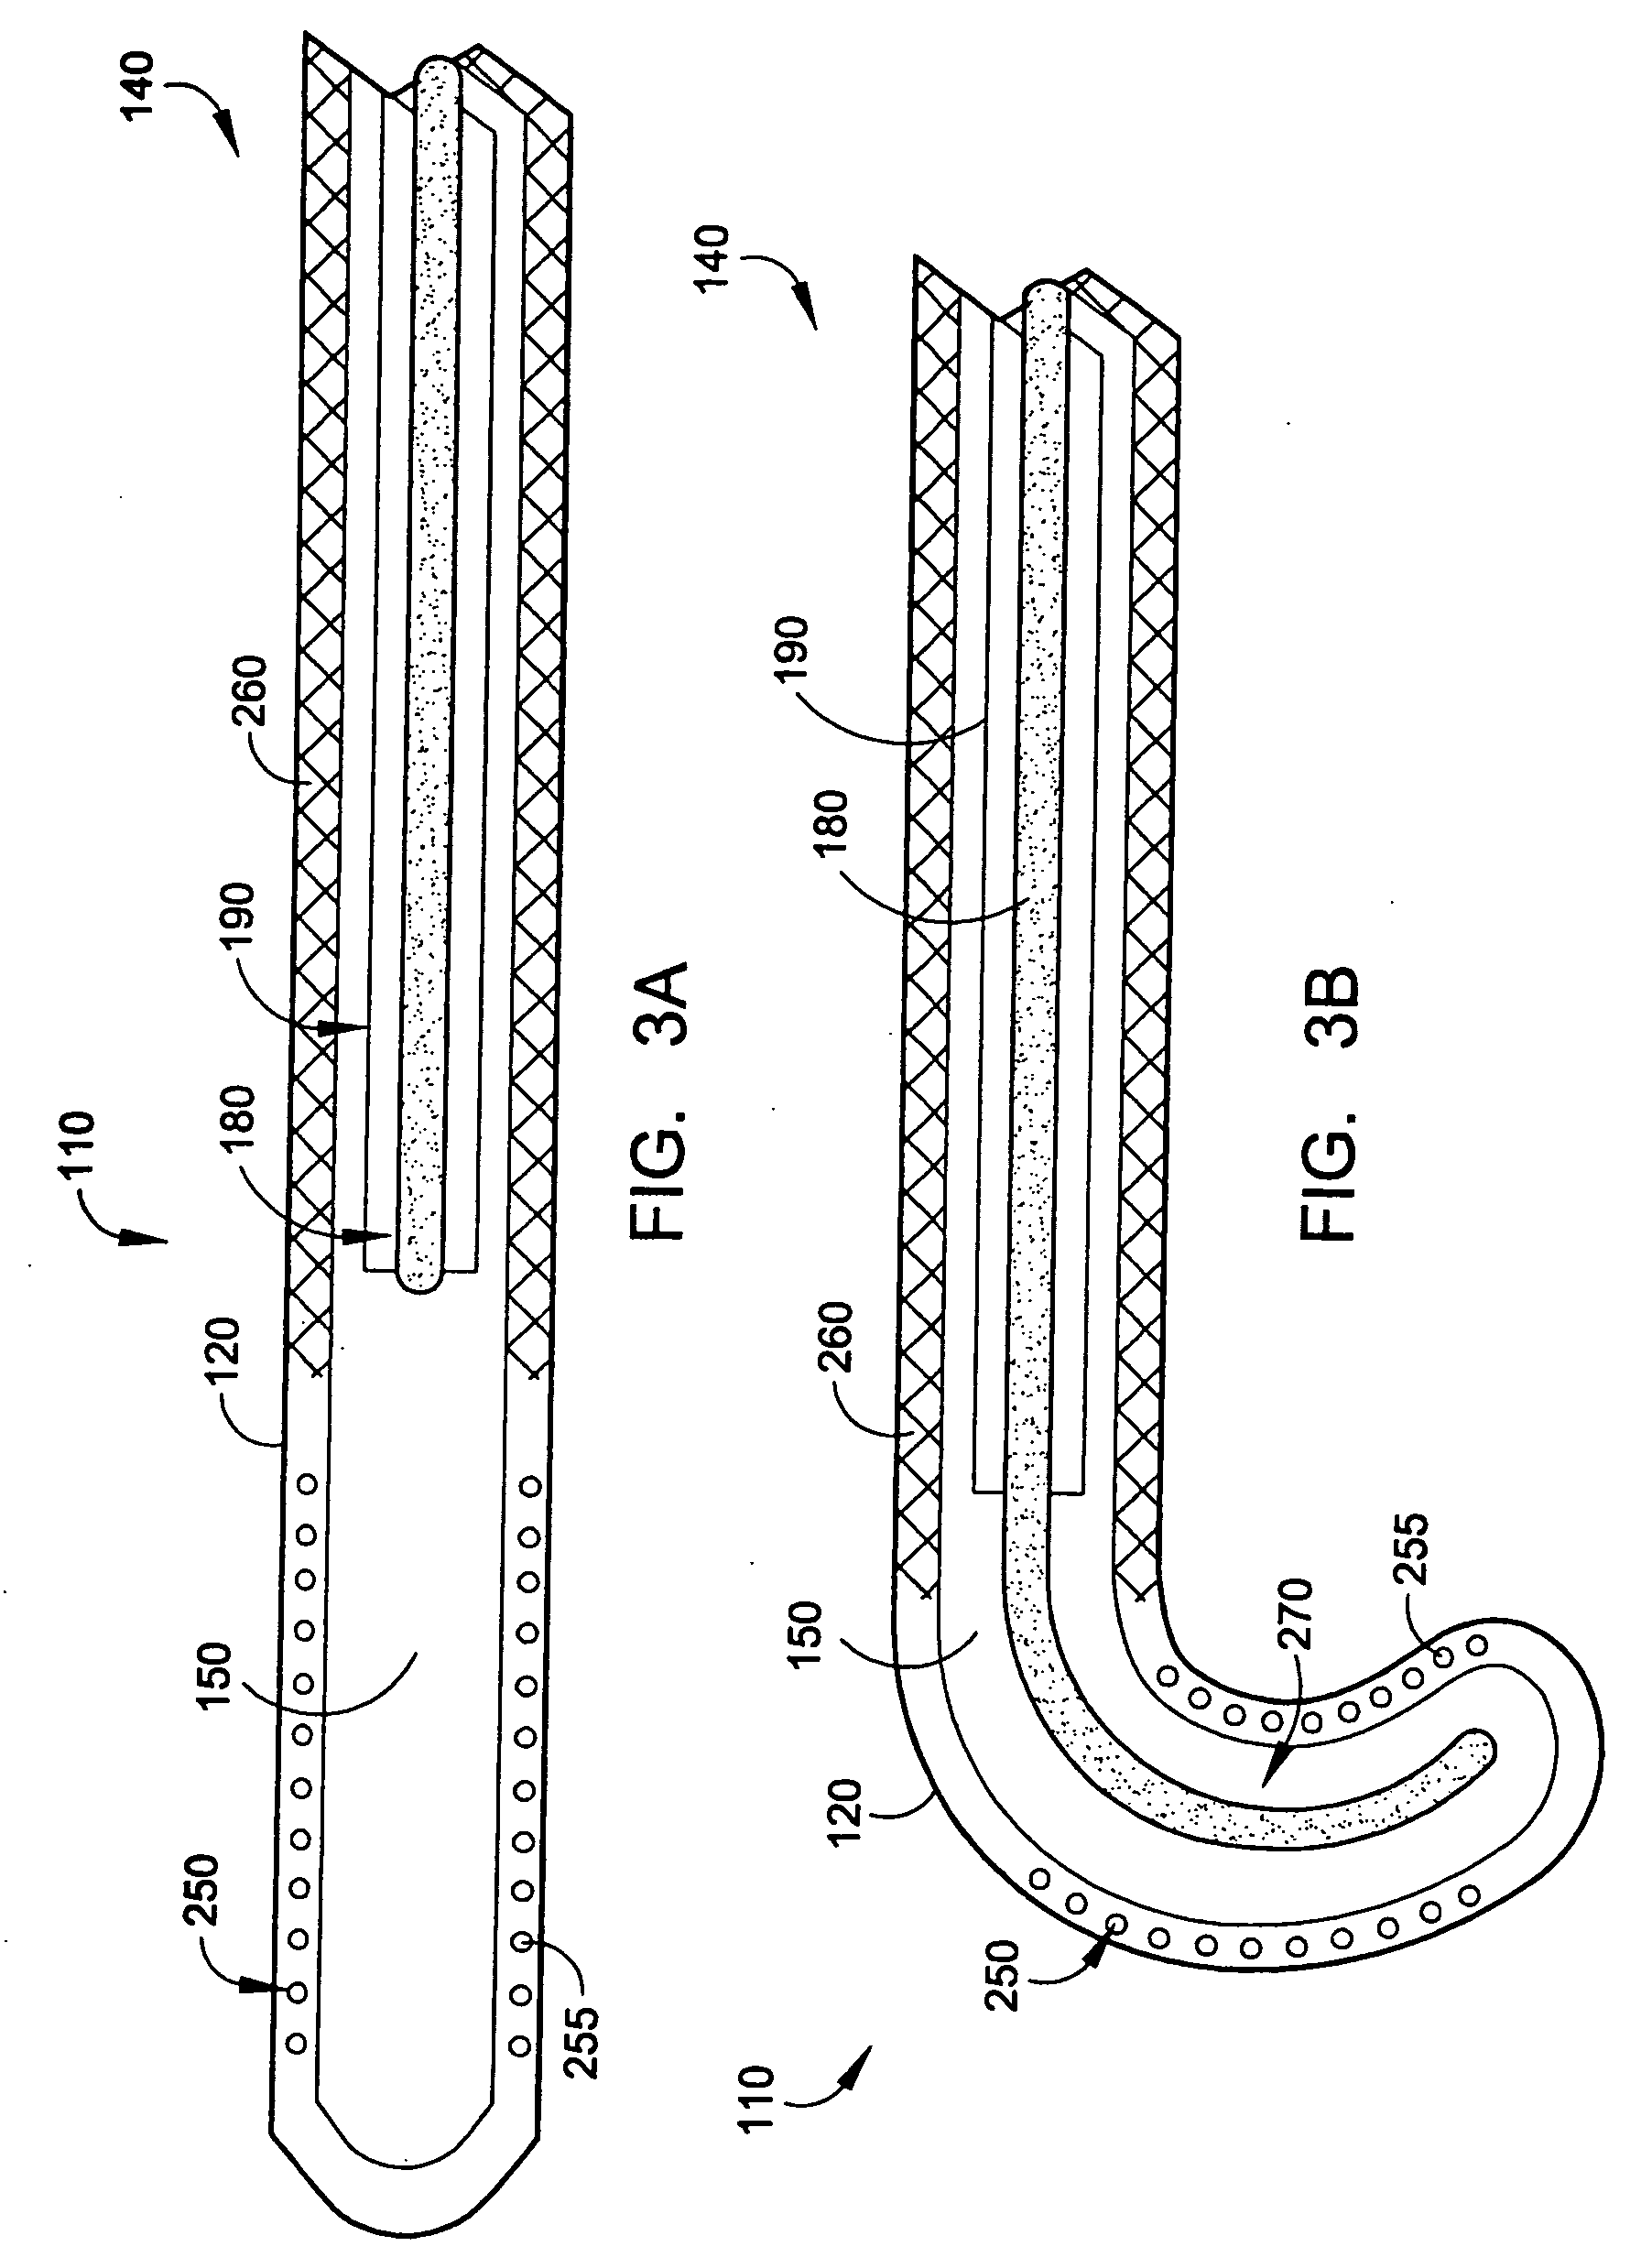 Radio-frequency based catheter system and method for ablating biological tissues